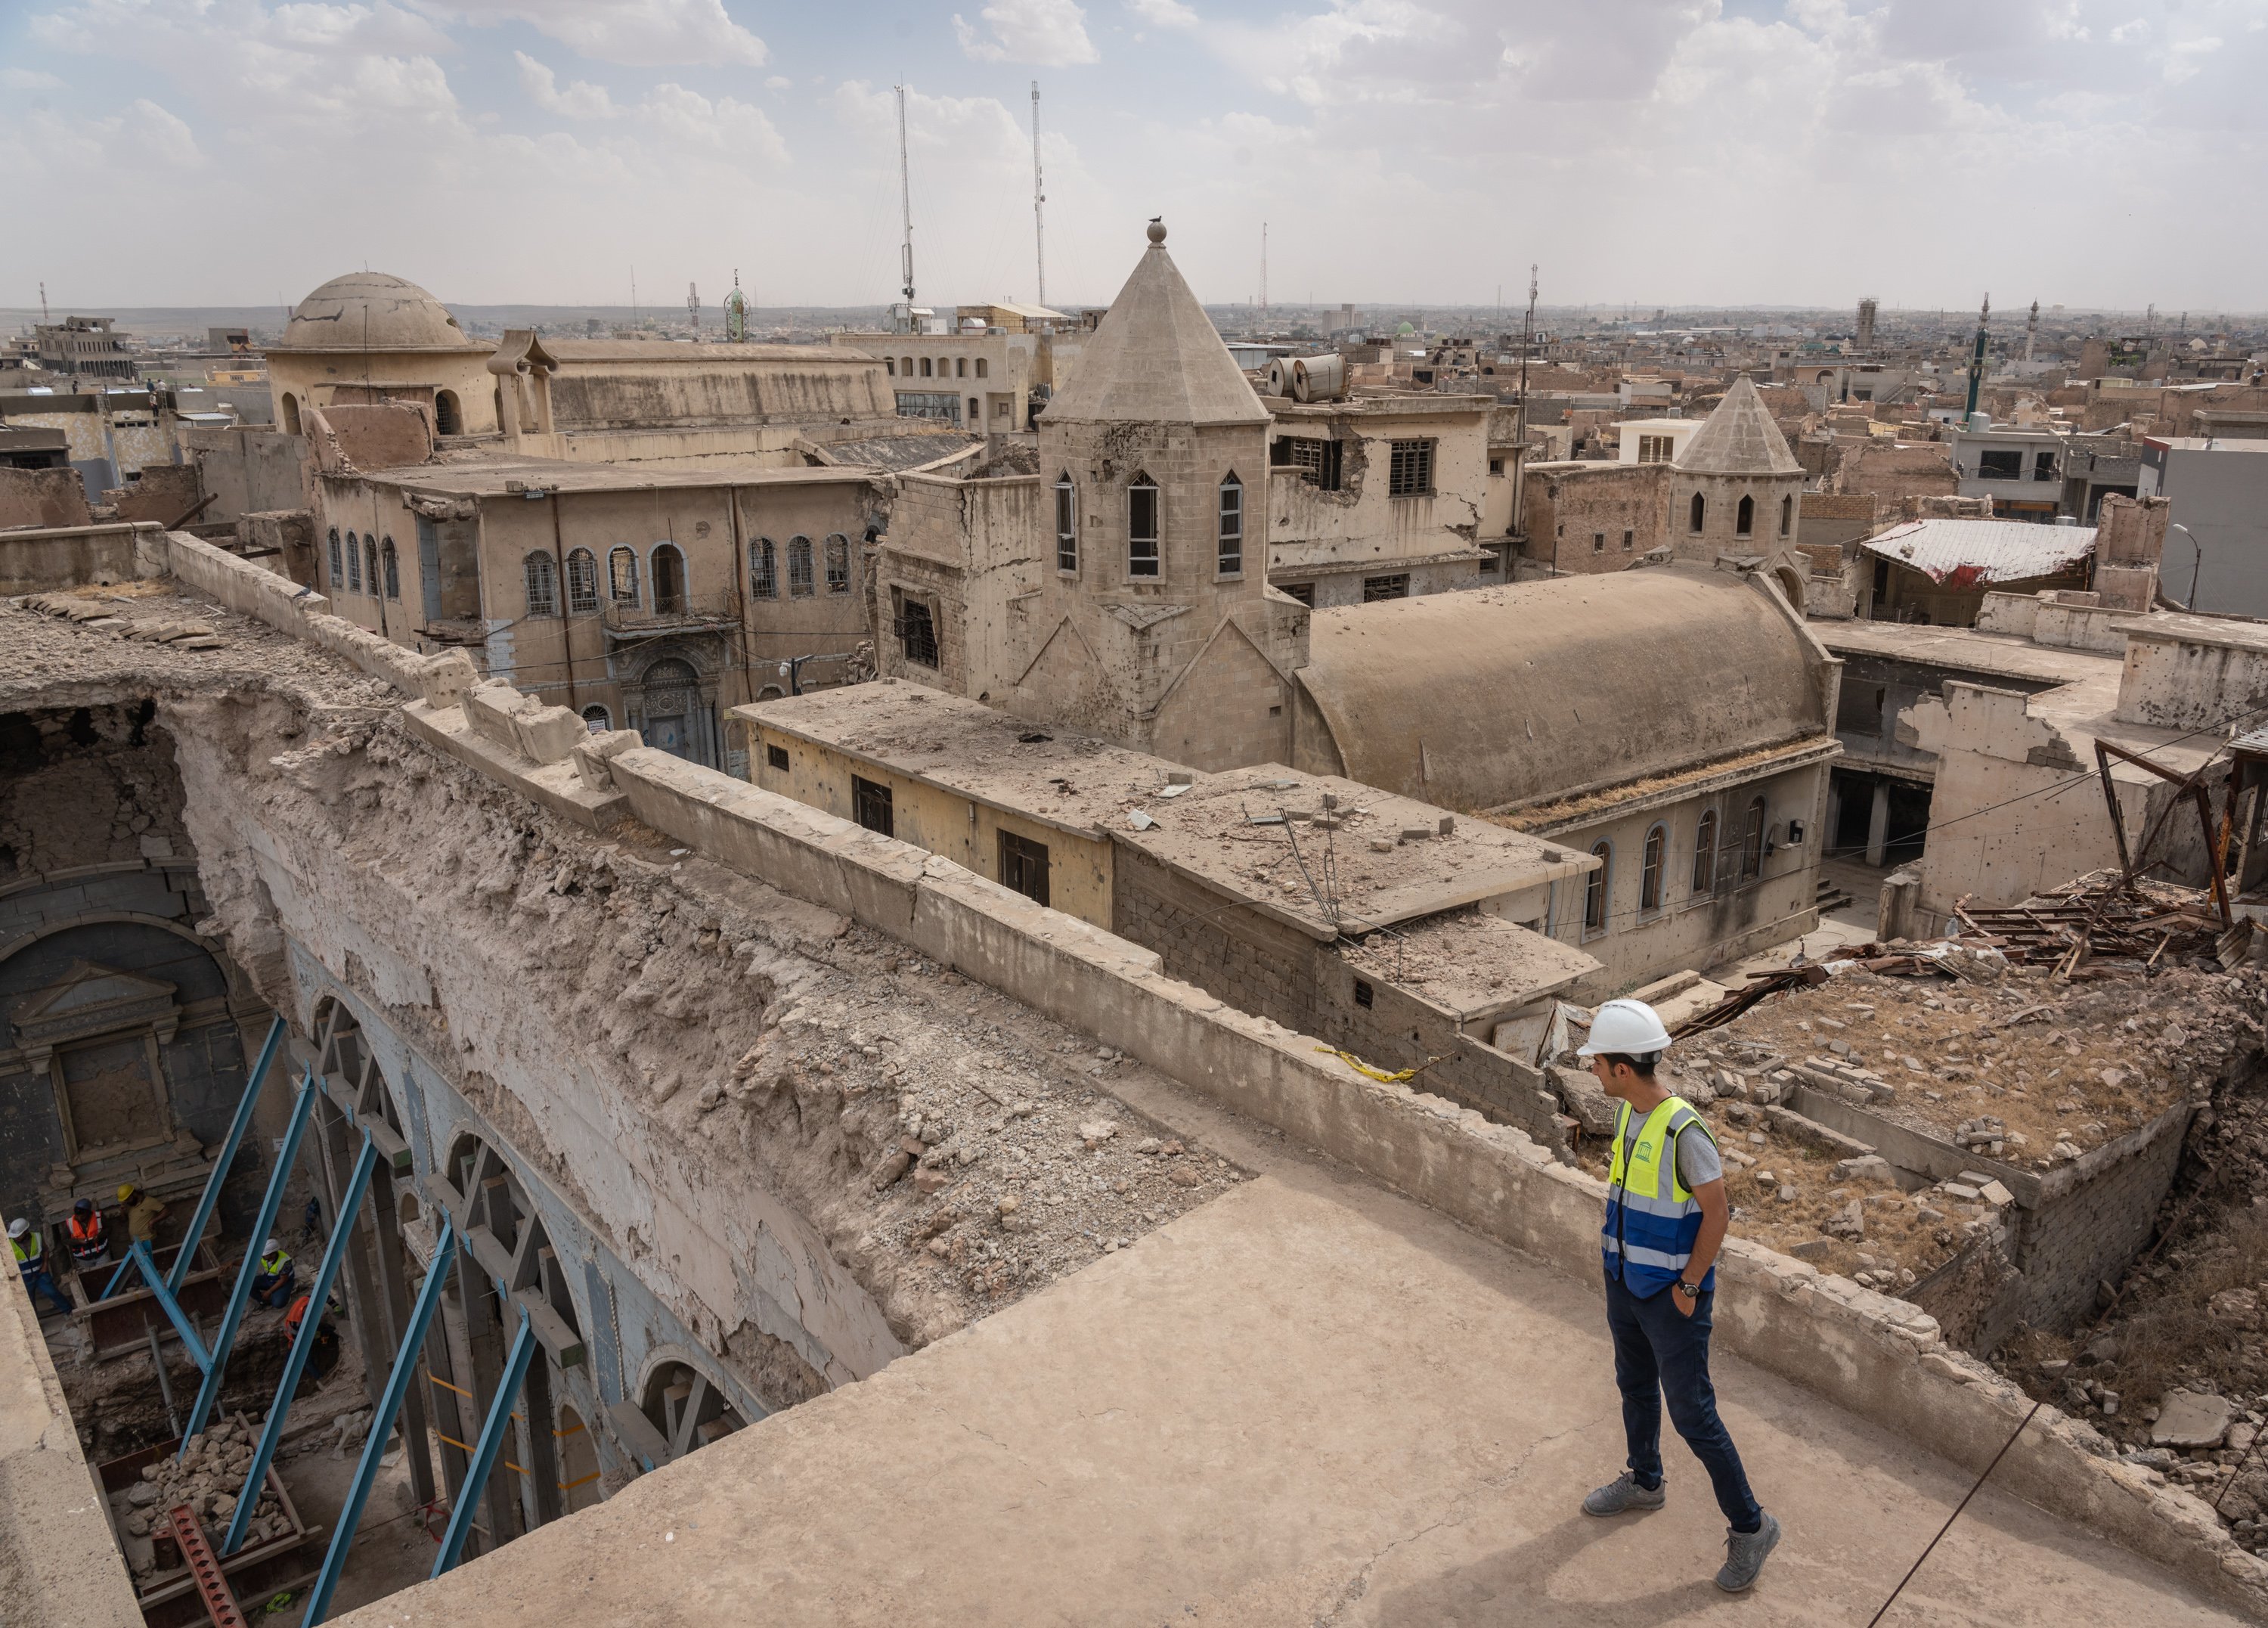 On the roof of St. Tahira Church in Mosul (image: Philip Breu)